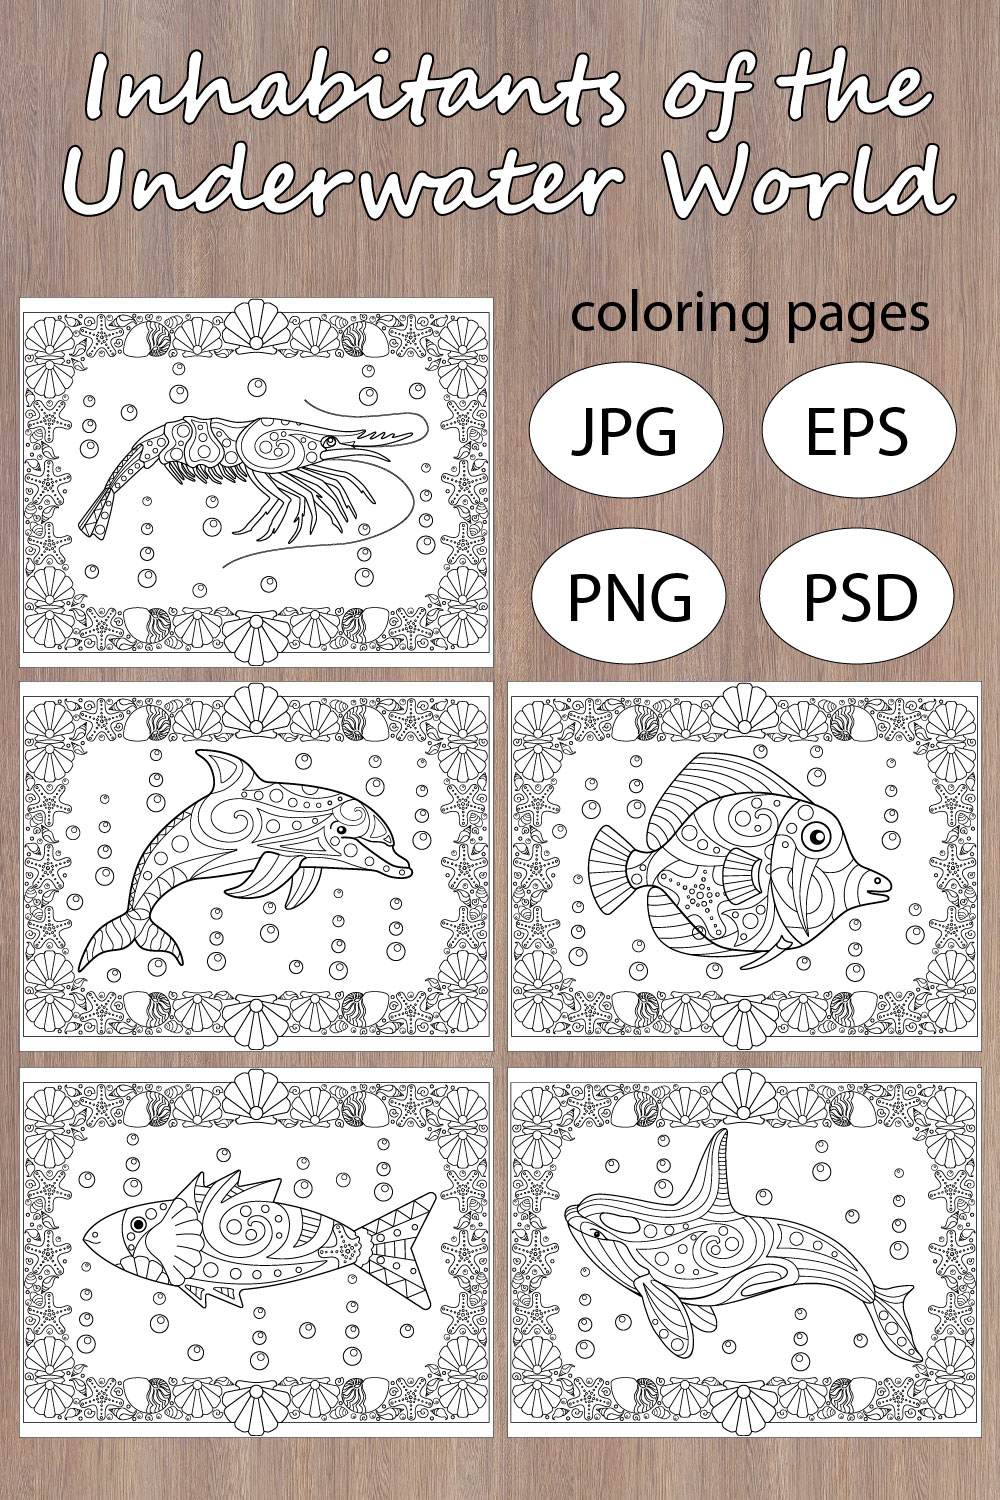 Inhabitants of the Underwater World - 5 coloring pages pinterest preview image.